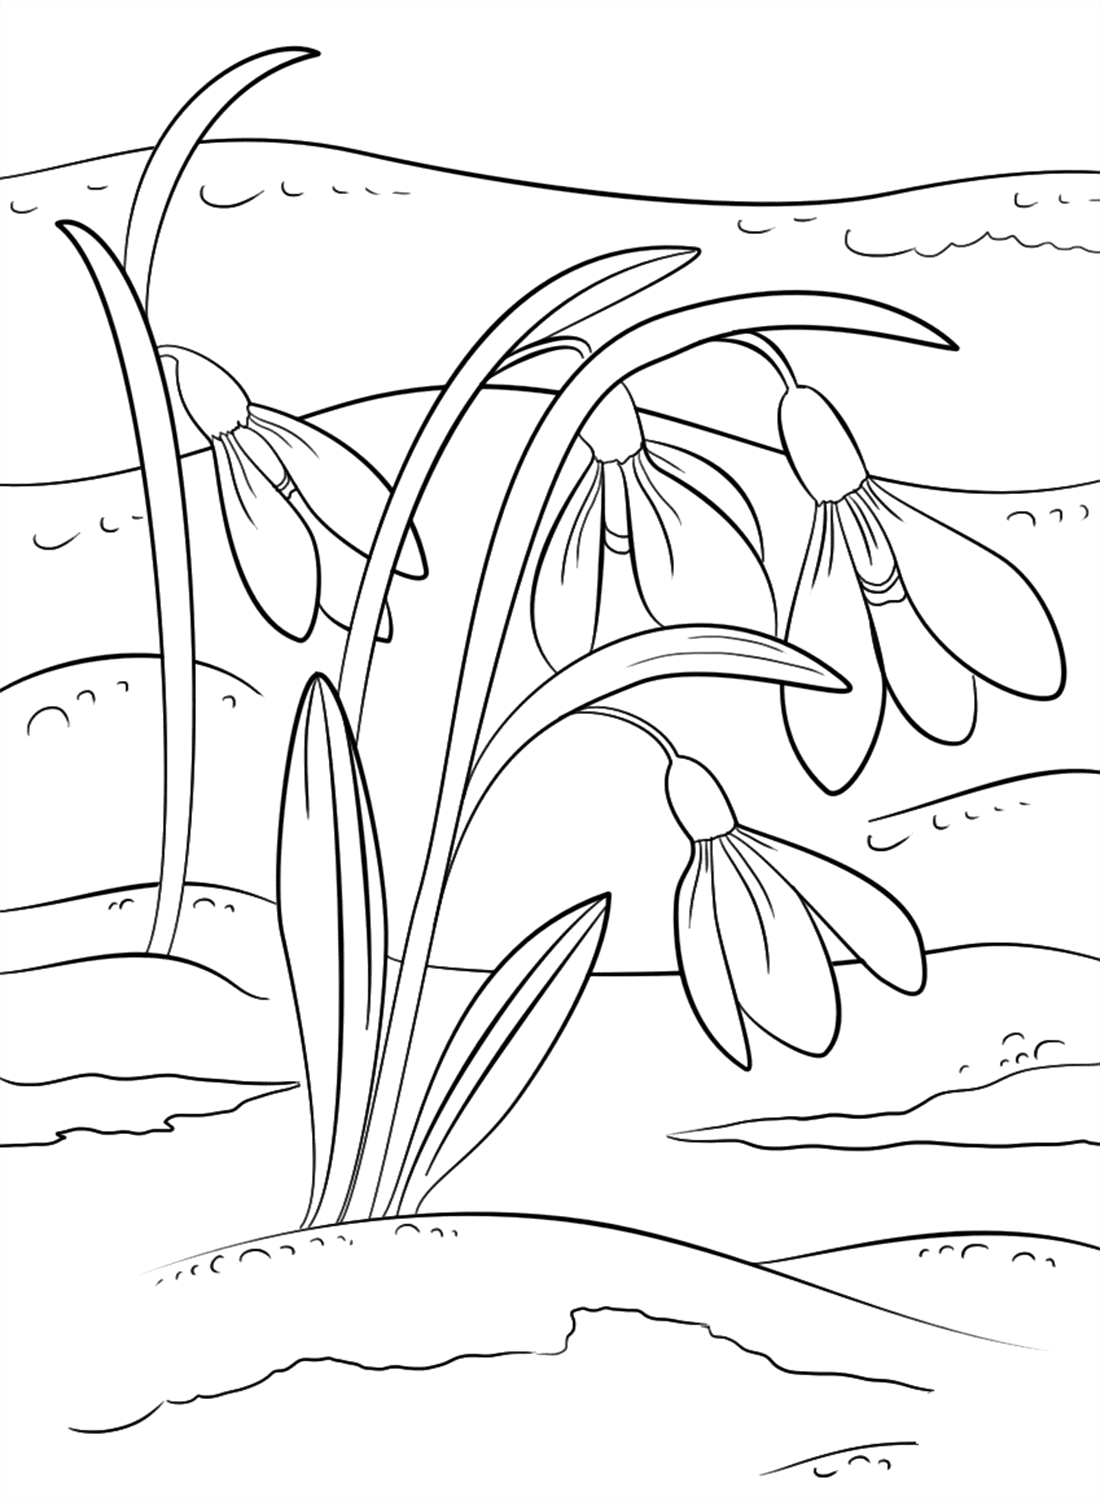 Snowdrop Flowers Coloring Pages